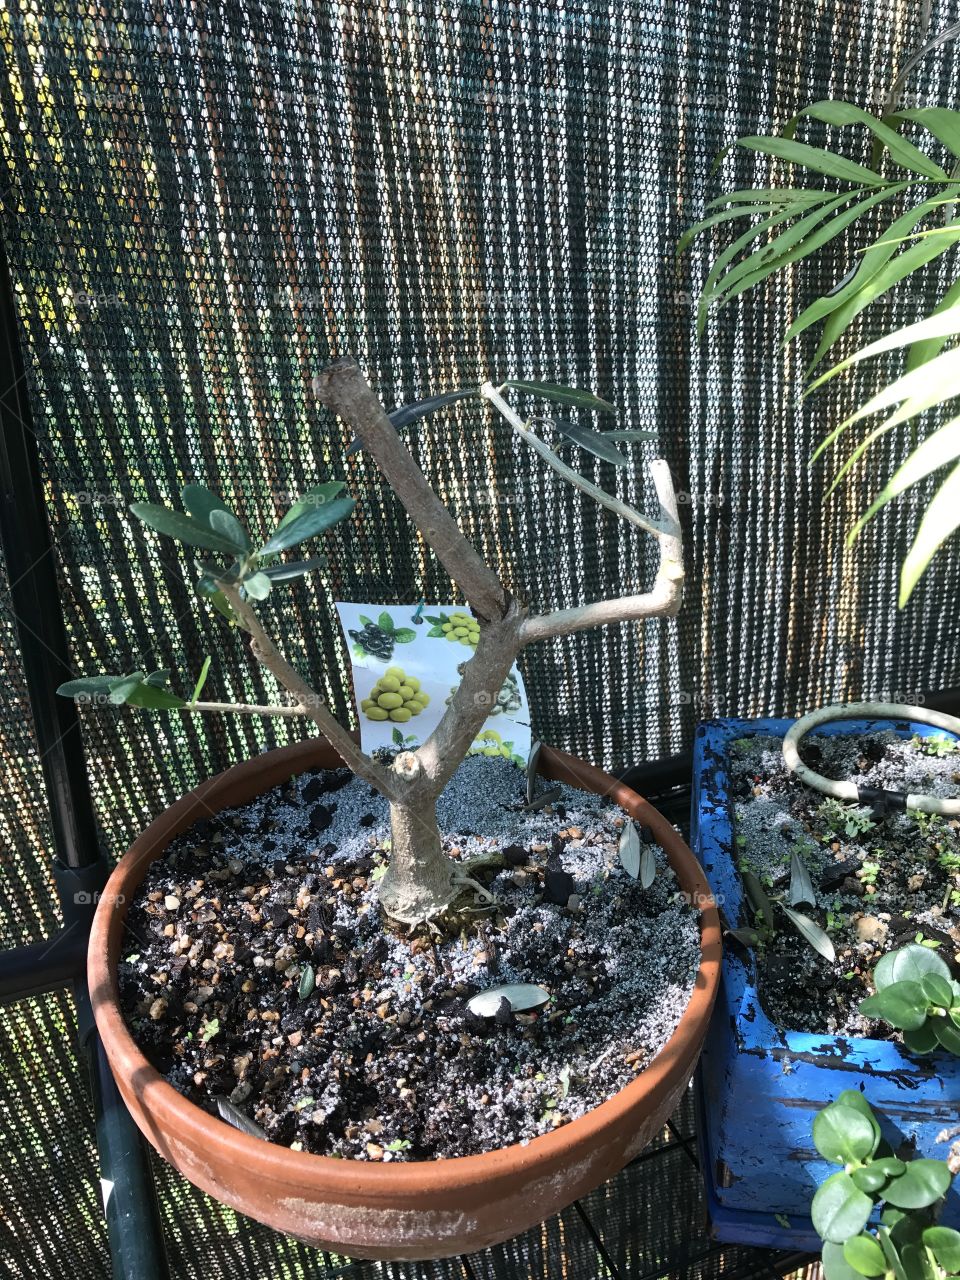 This is my work-progress olive bonsai. It was purchased in 2016 and is doing well. There have been several significant cut backs to this tree and each time it responds well. Photo taken in May 2017.
